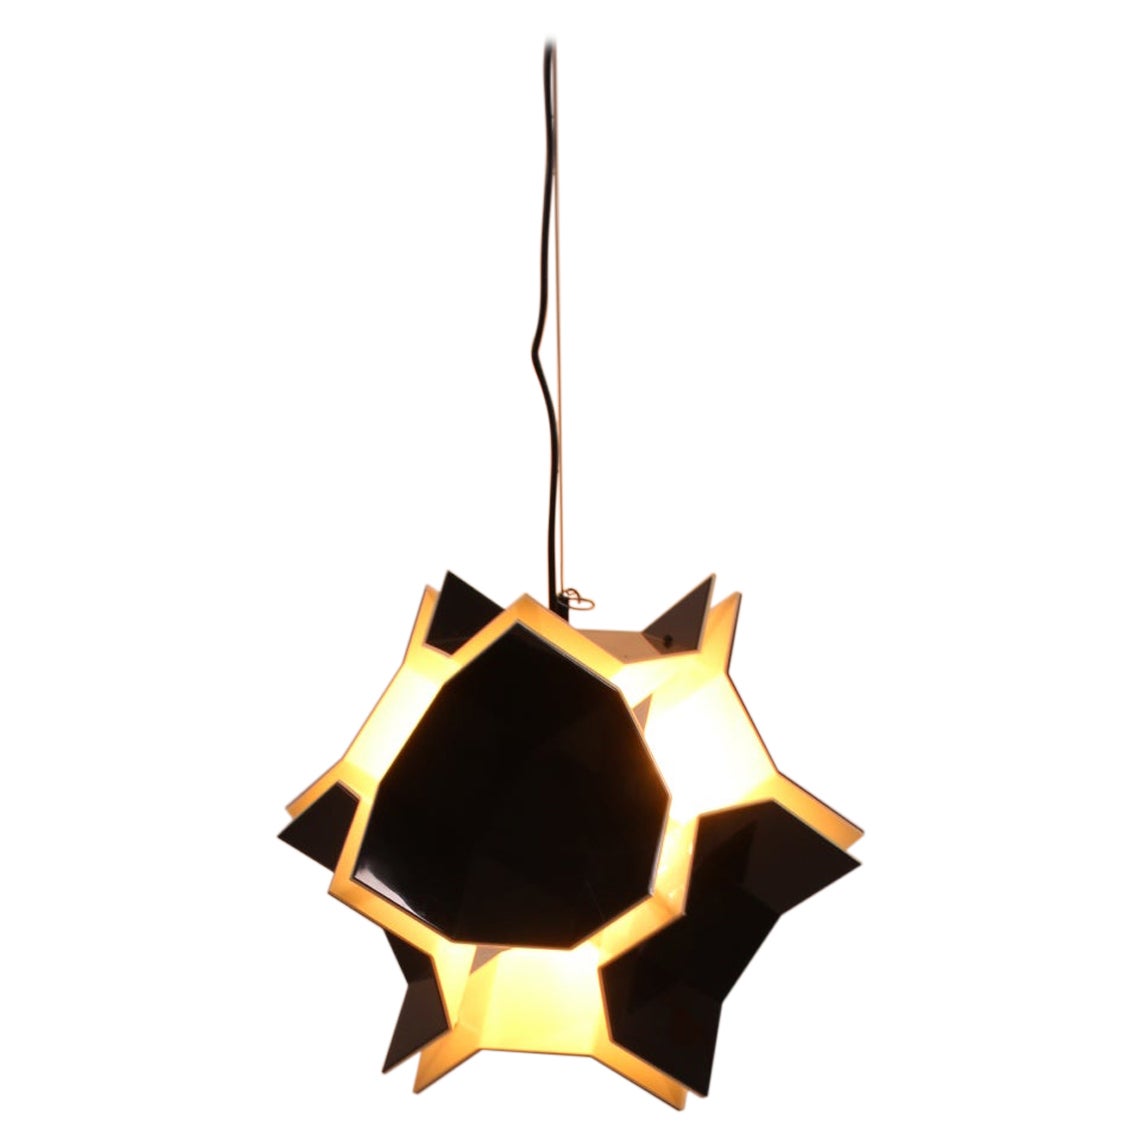 Space Age Acrylic Pendant Lamp by Christophe de Ryck for Dark, 1970s For Sale